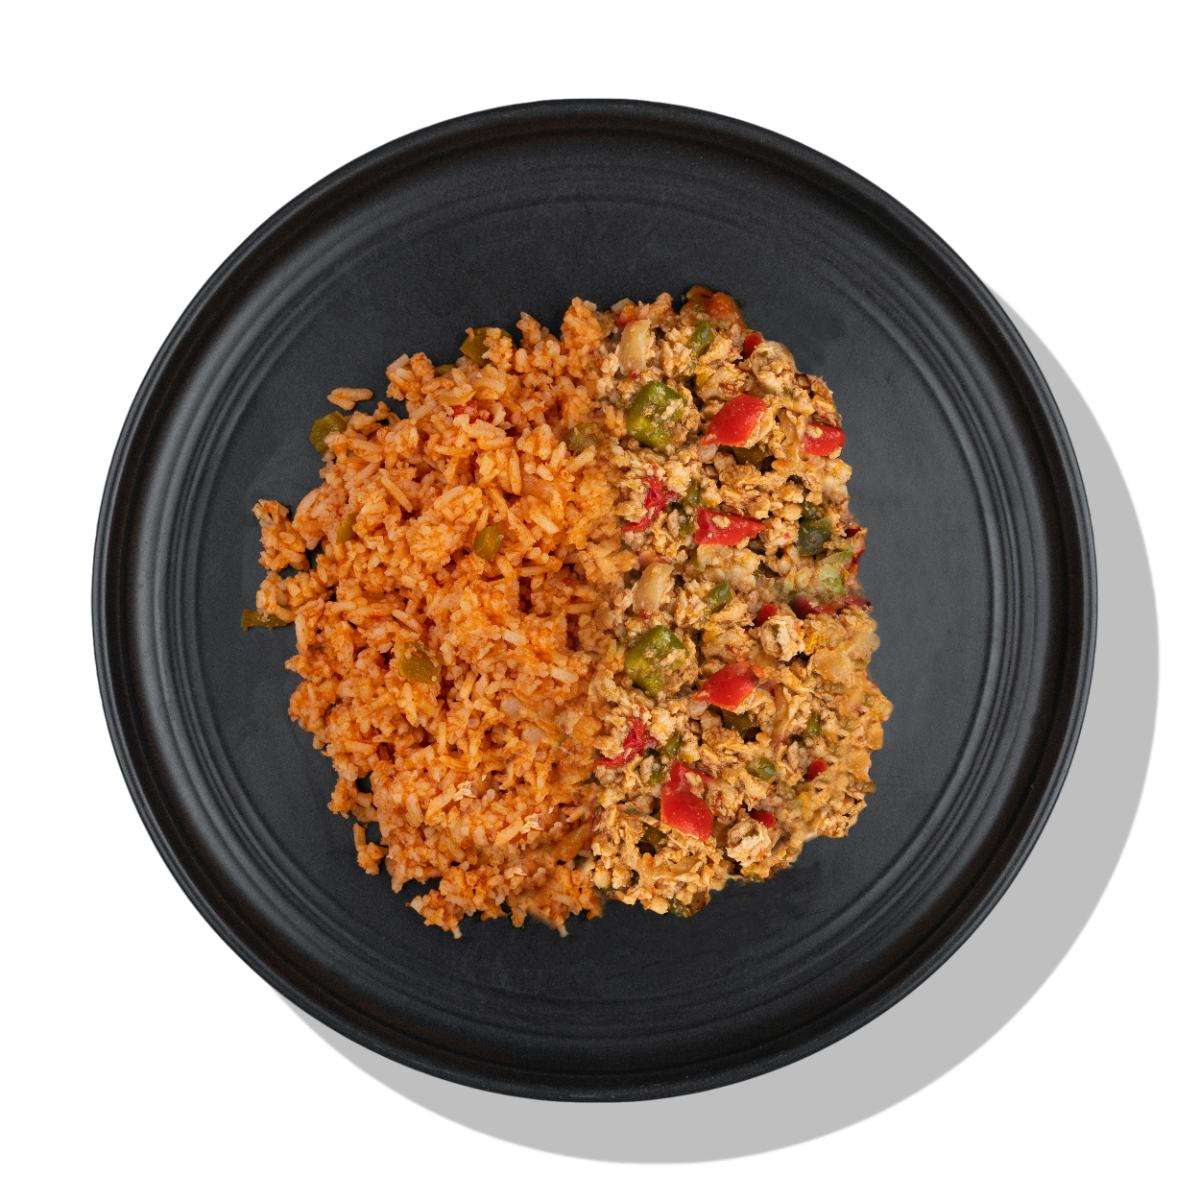 The Flexican 2.0: Seasoned ground chicken topped with homemade roasted tomato salsa served with a side of Mexican red rice.